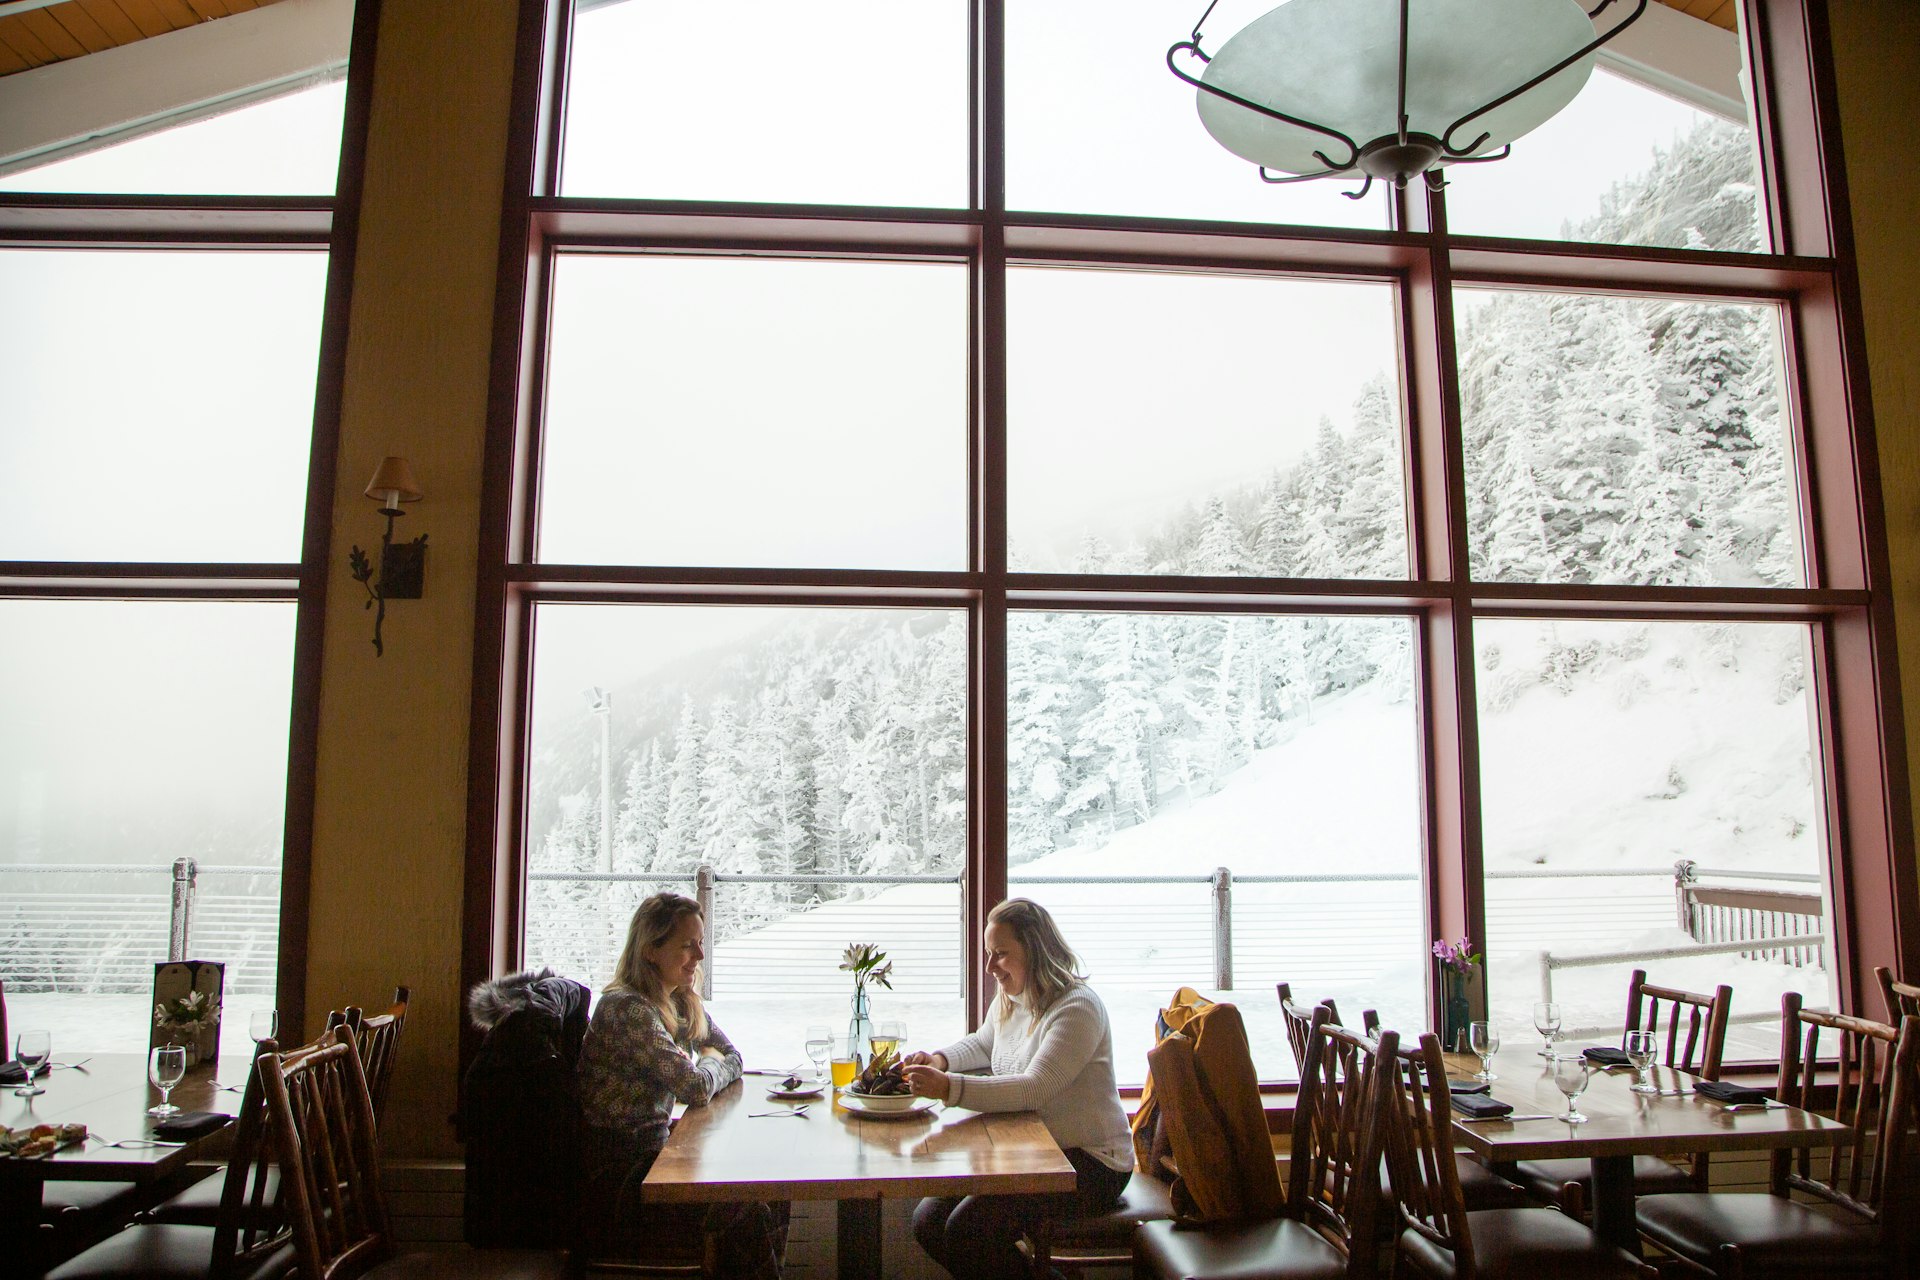 Two women eating inside a restaurant with large windows